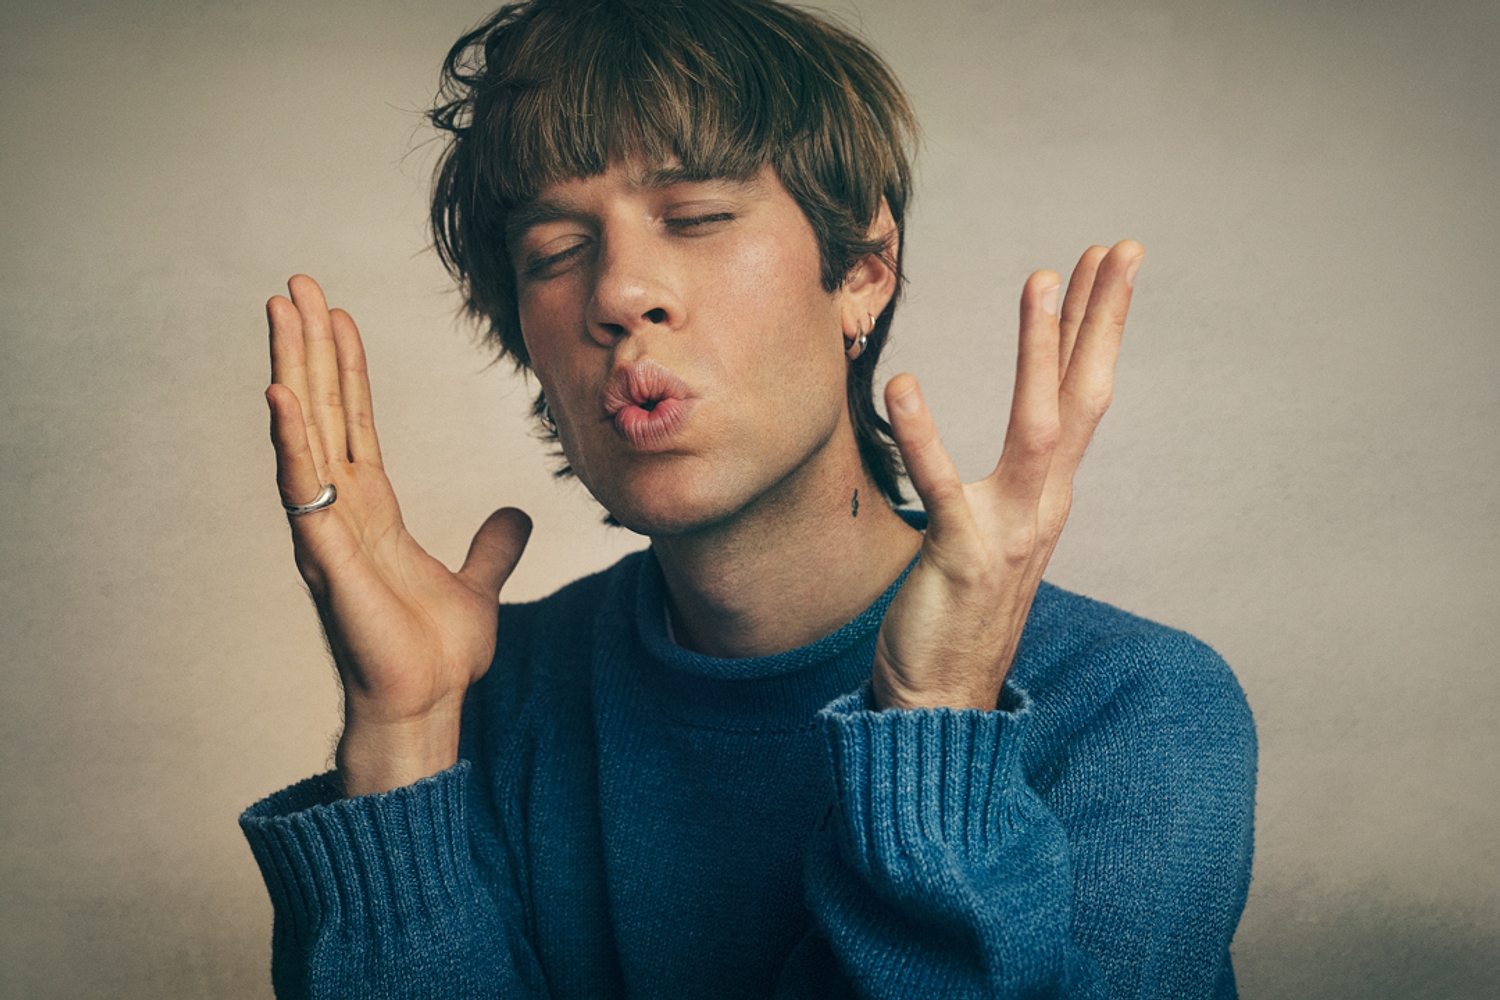 Porches announces new album ‘All Day Gentle Hold !’